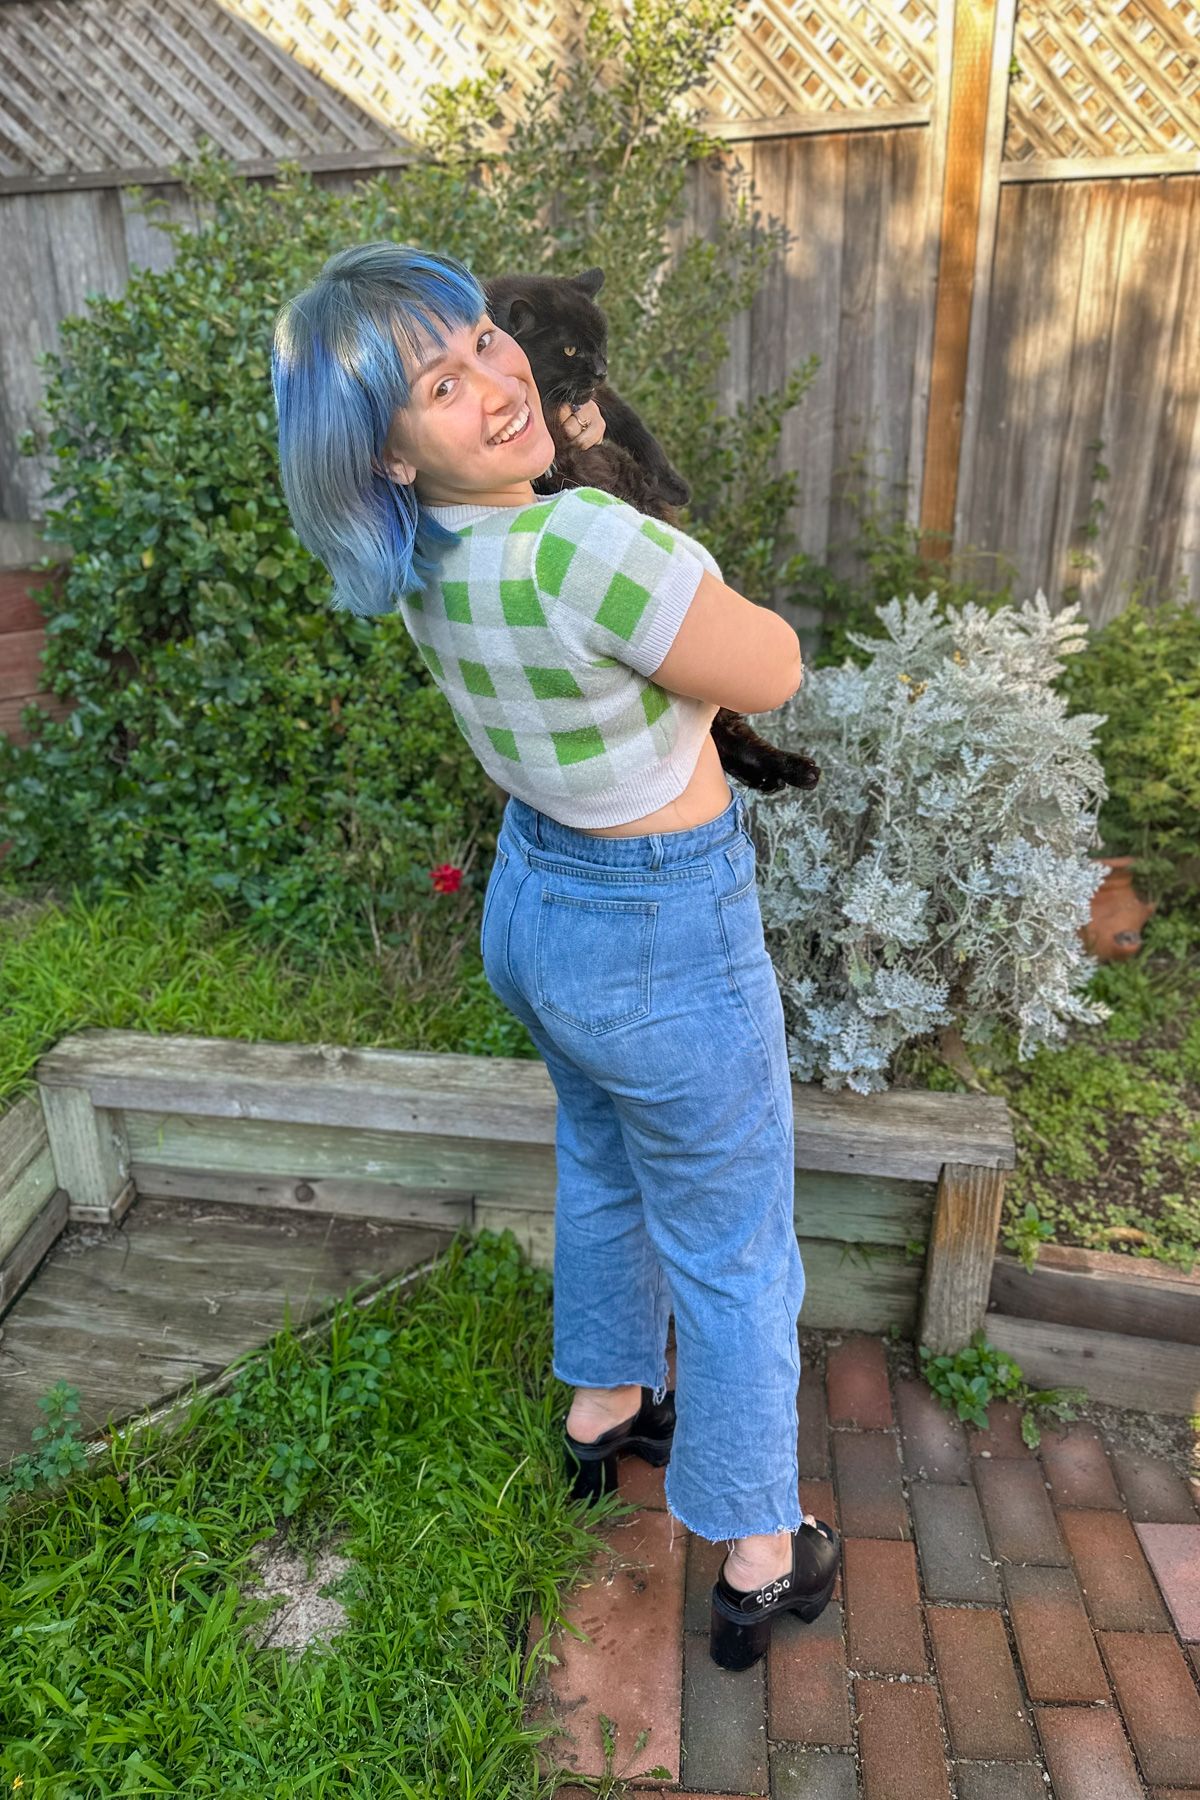 A blue-haired woman wearing a cropped, green and white checkered sweater and jeans smiles over her shoulder, holding a black cat, while standing on a brick patio in front of a backyard fence.